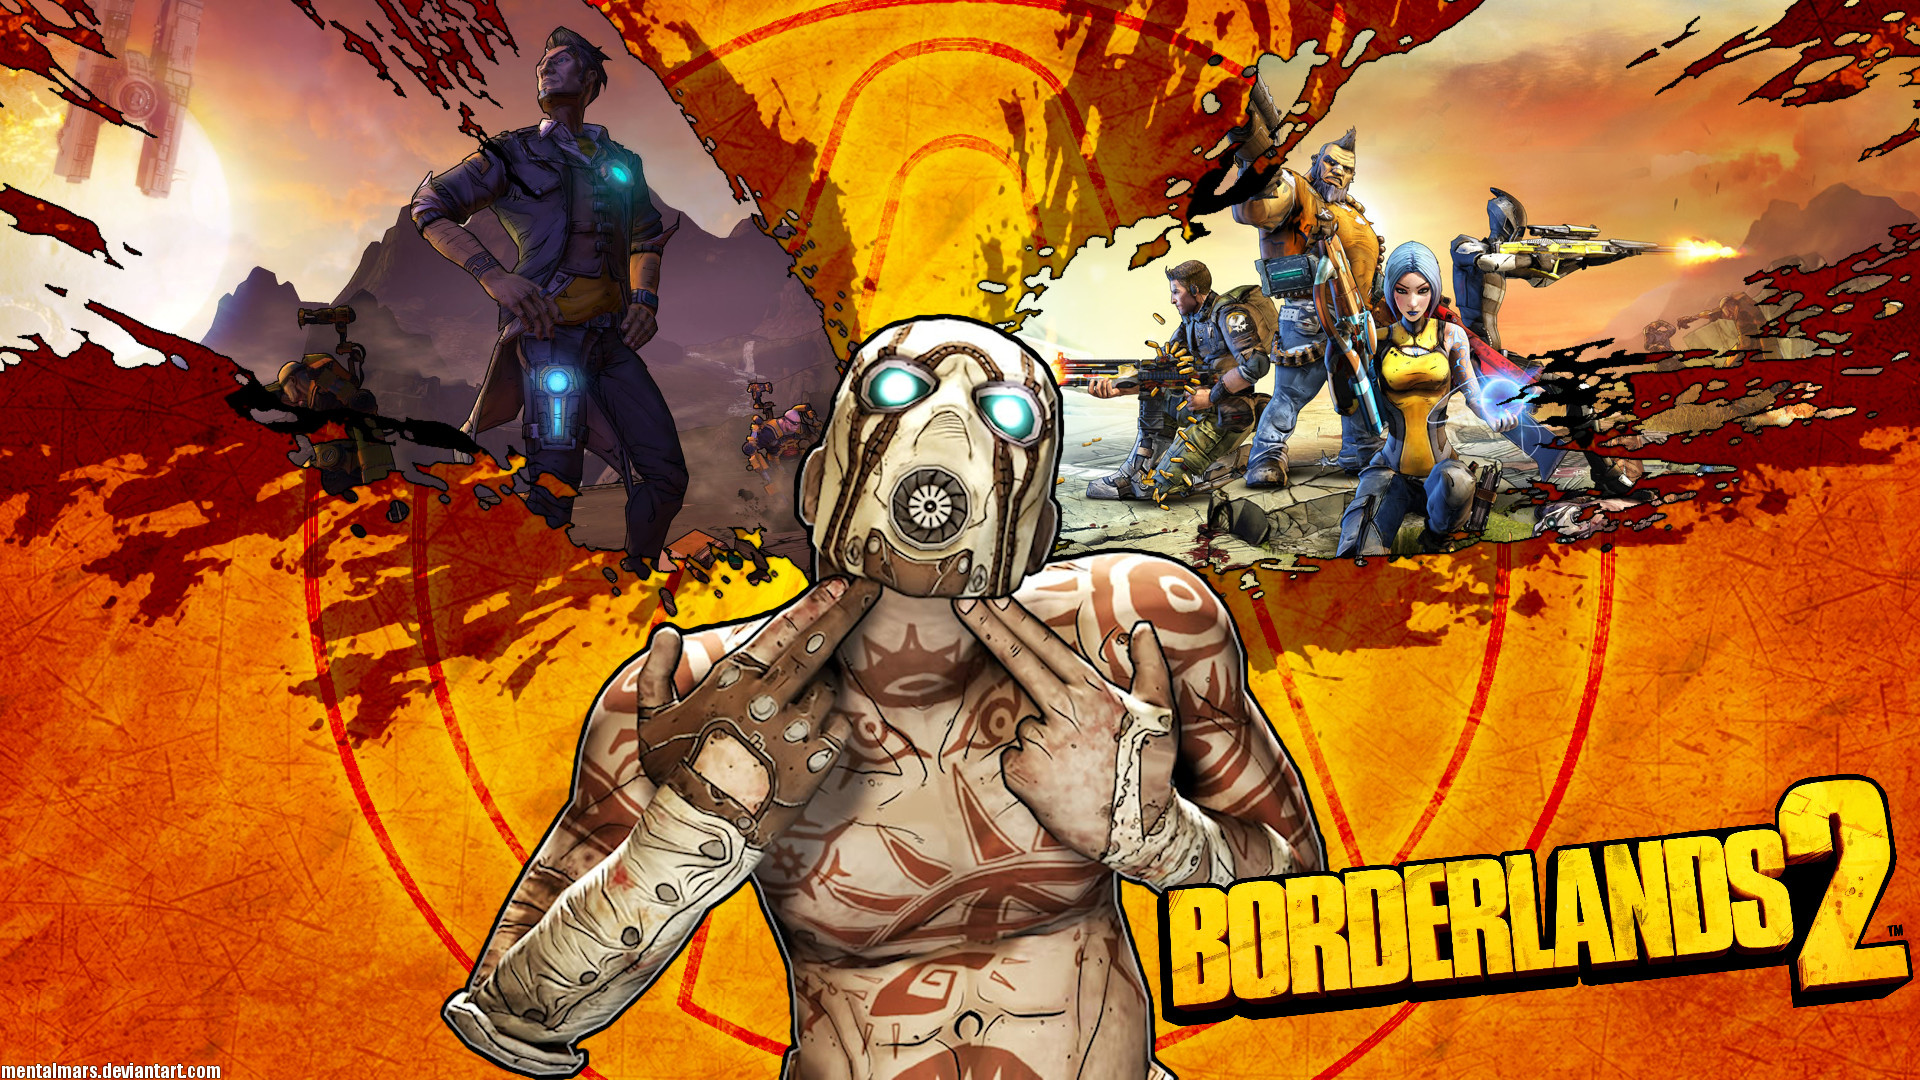 1920x1080 ... Comic books, movies, games blog everything related to fiction ... Borderlands  2 Wallpapers  - Wallpaper Cave borderlands 2 hd ...